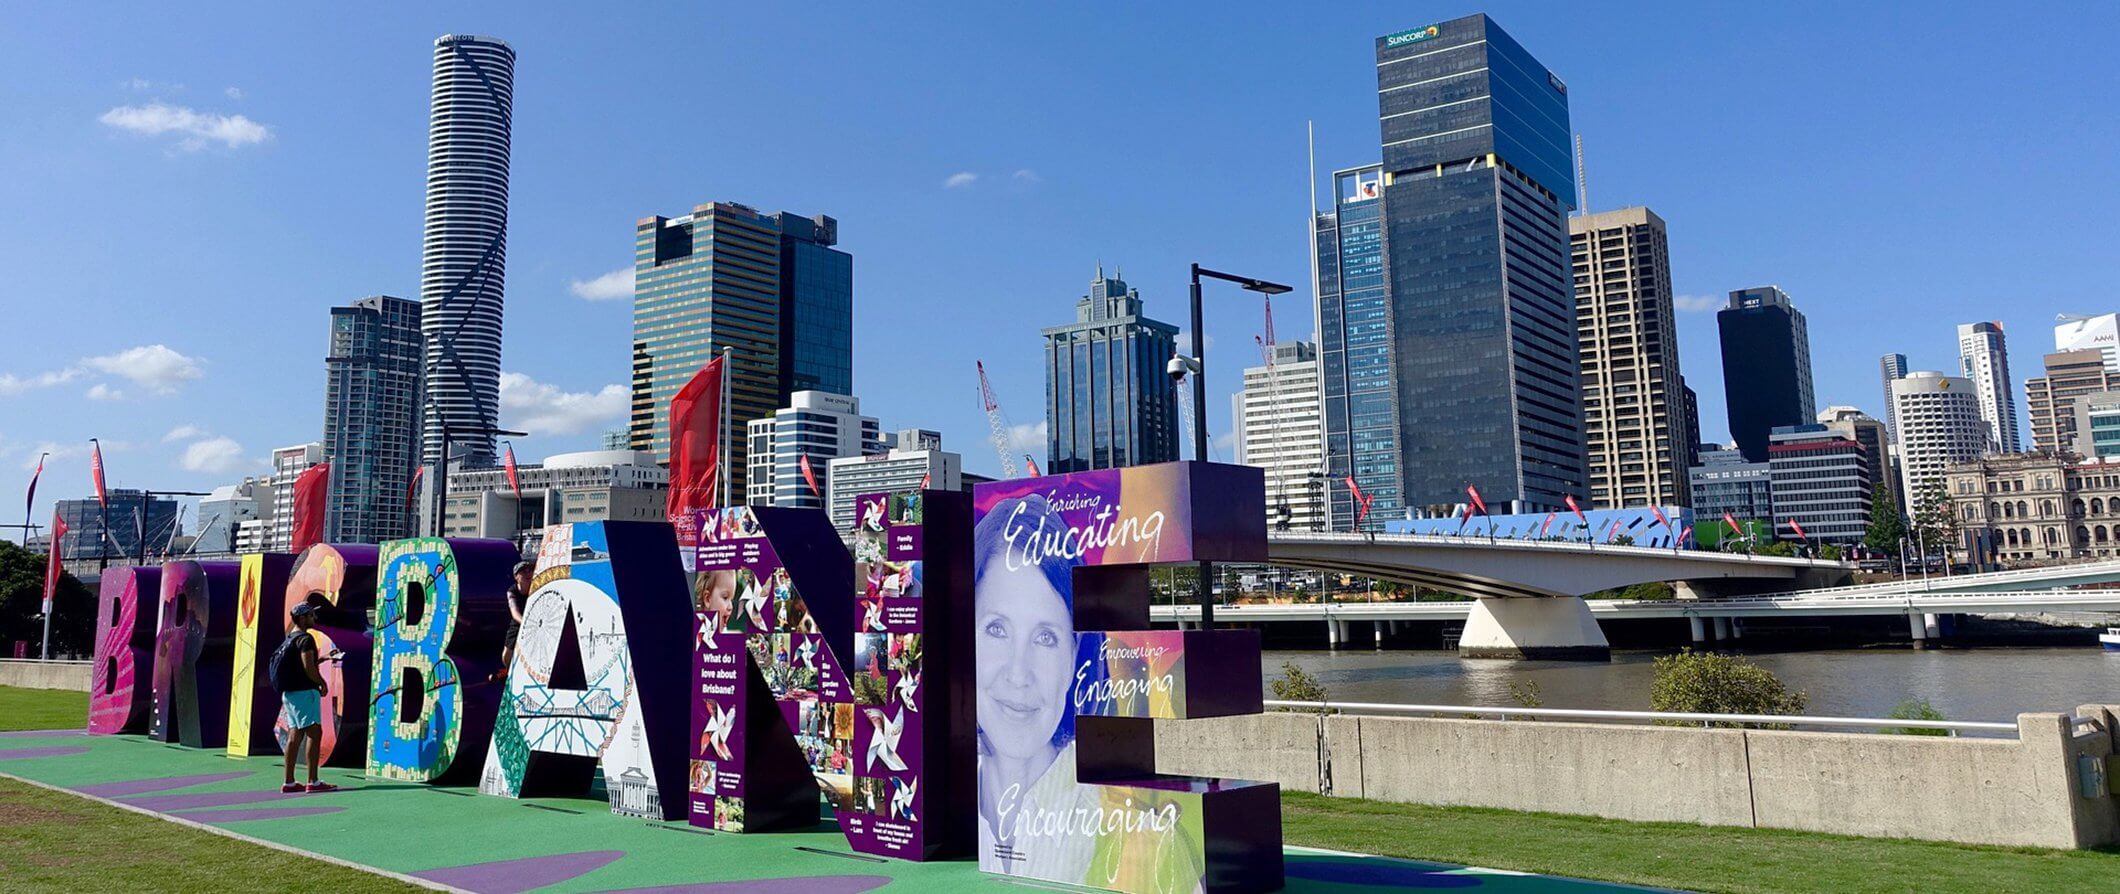 the colorful large Brisbane sign in Brisbane Australia in the foreground. the tall buildings of the city in the background